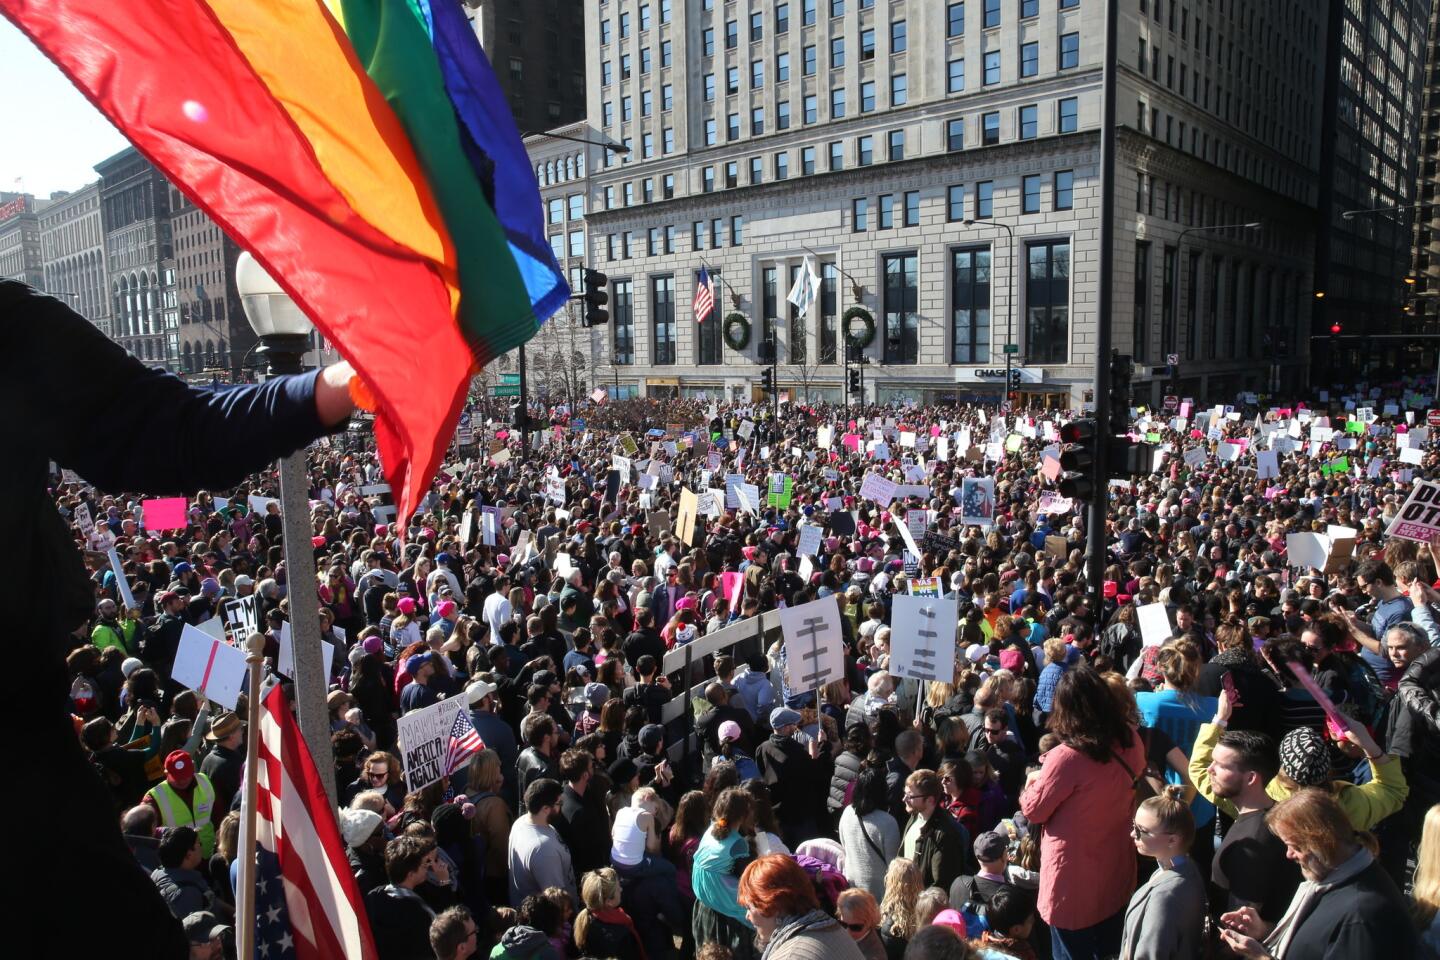 Crowds gather for the Women's March in Chicago on Jan. 21, 2017.